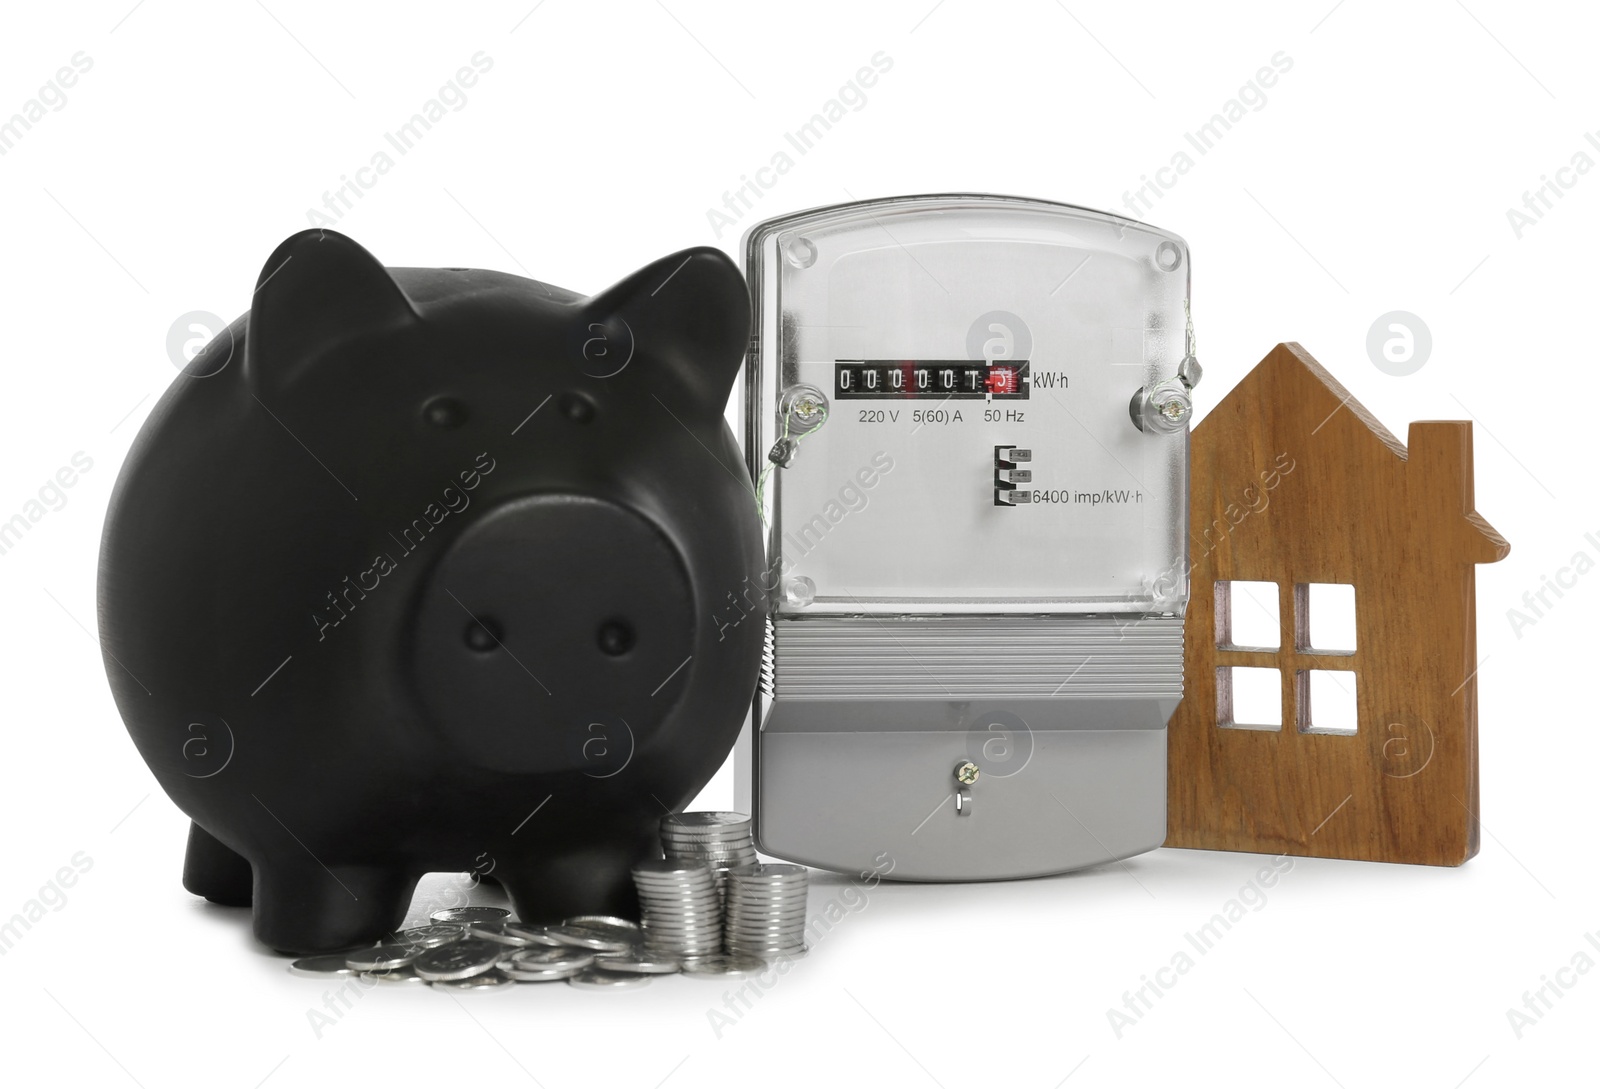 Photo of Electricity meter, house model, piggy bank and coins on white background